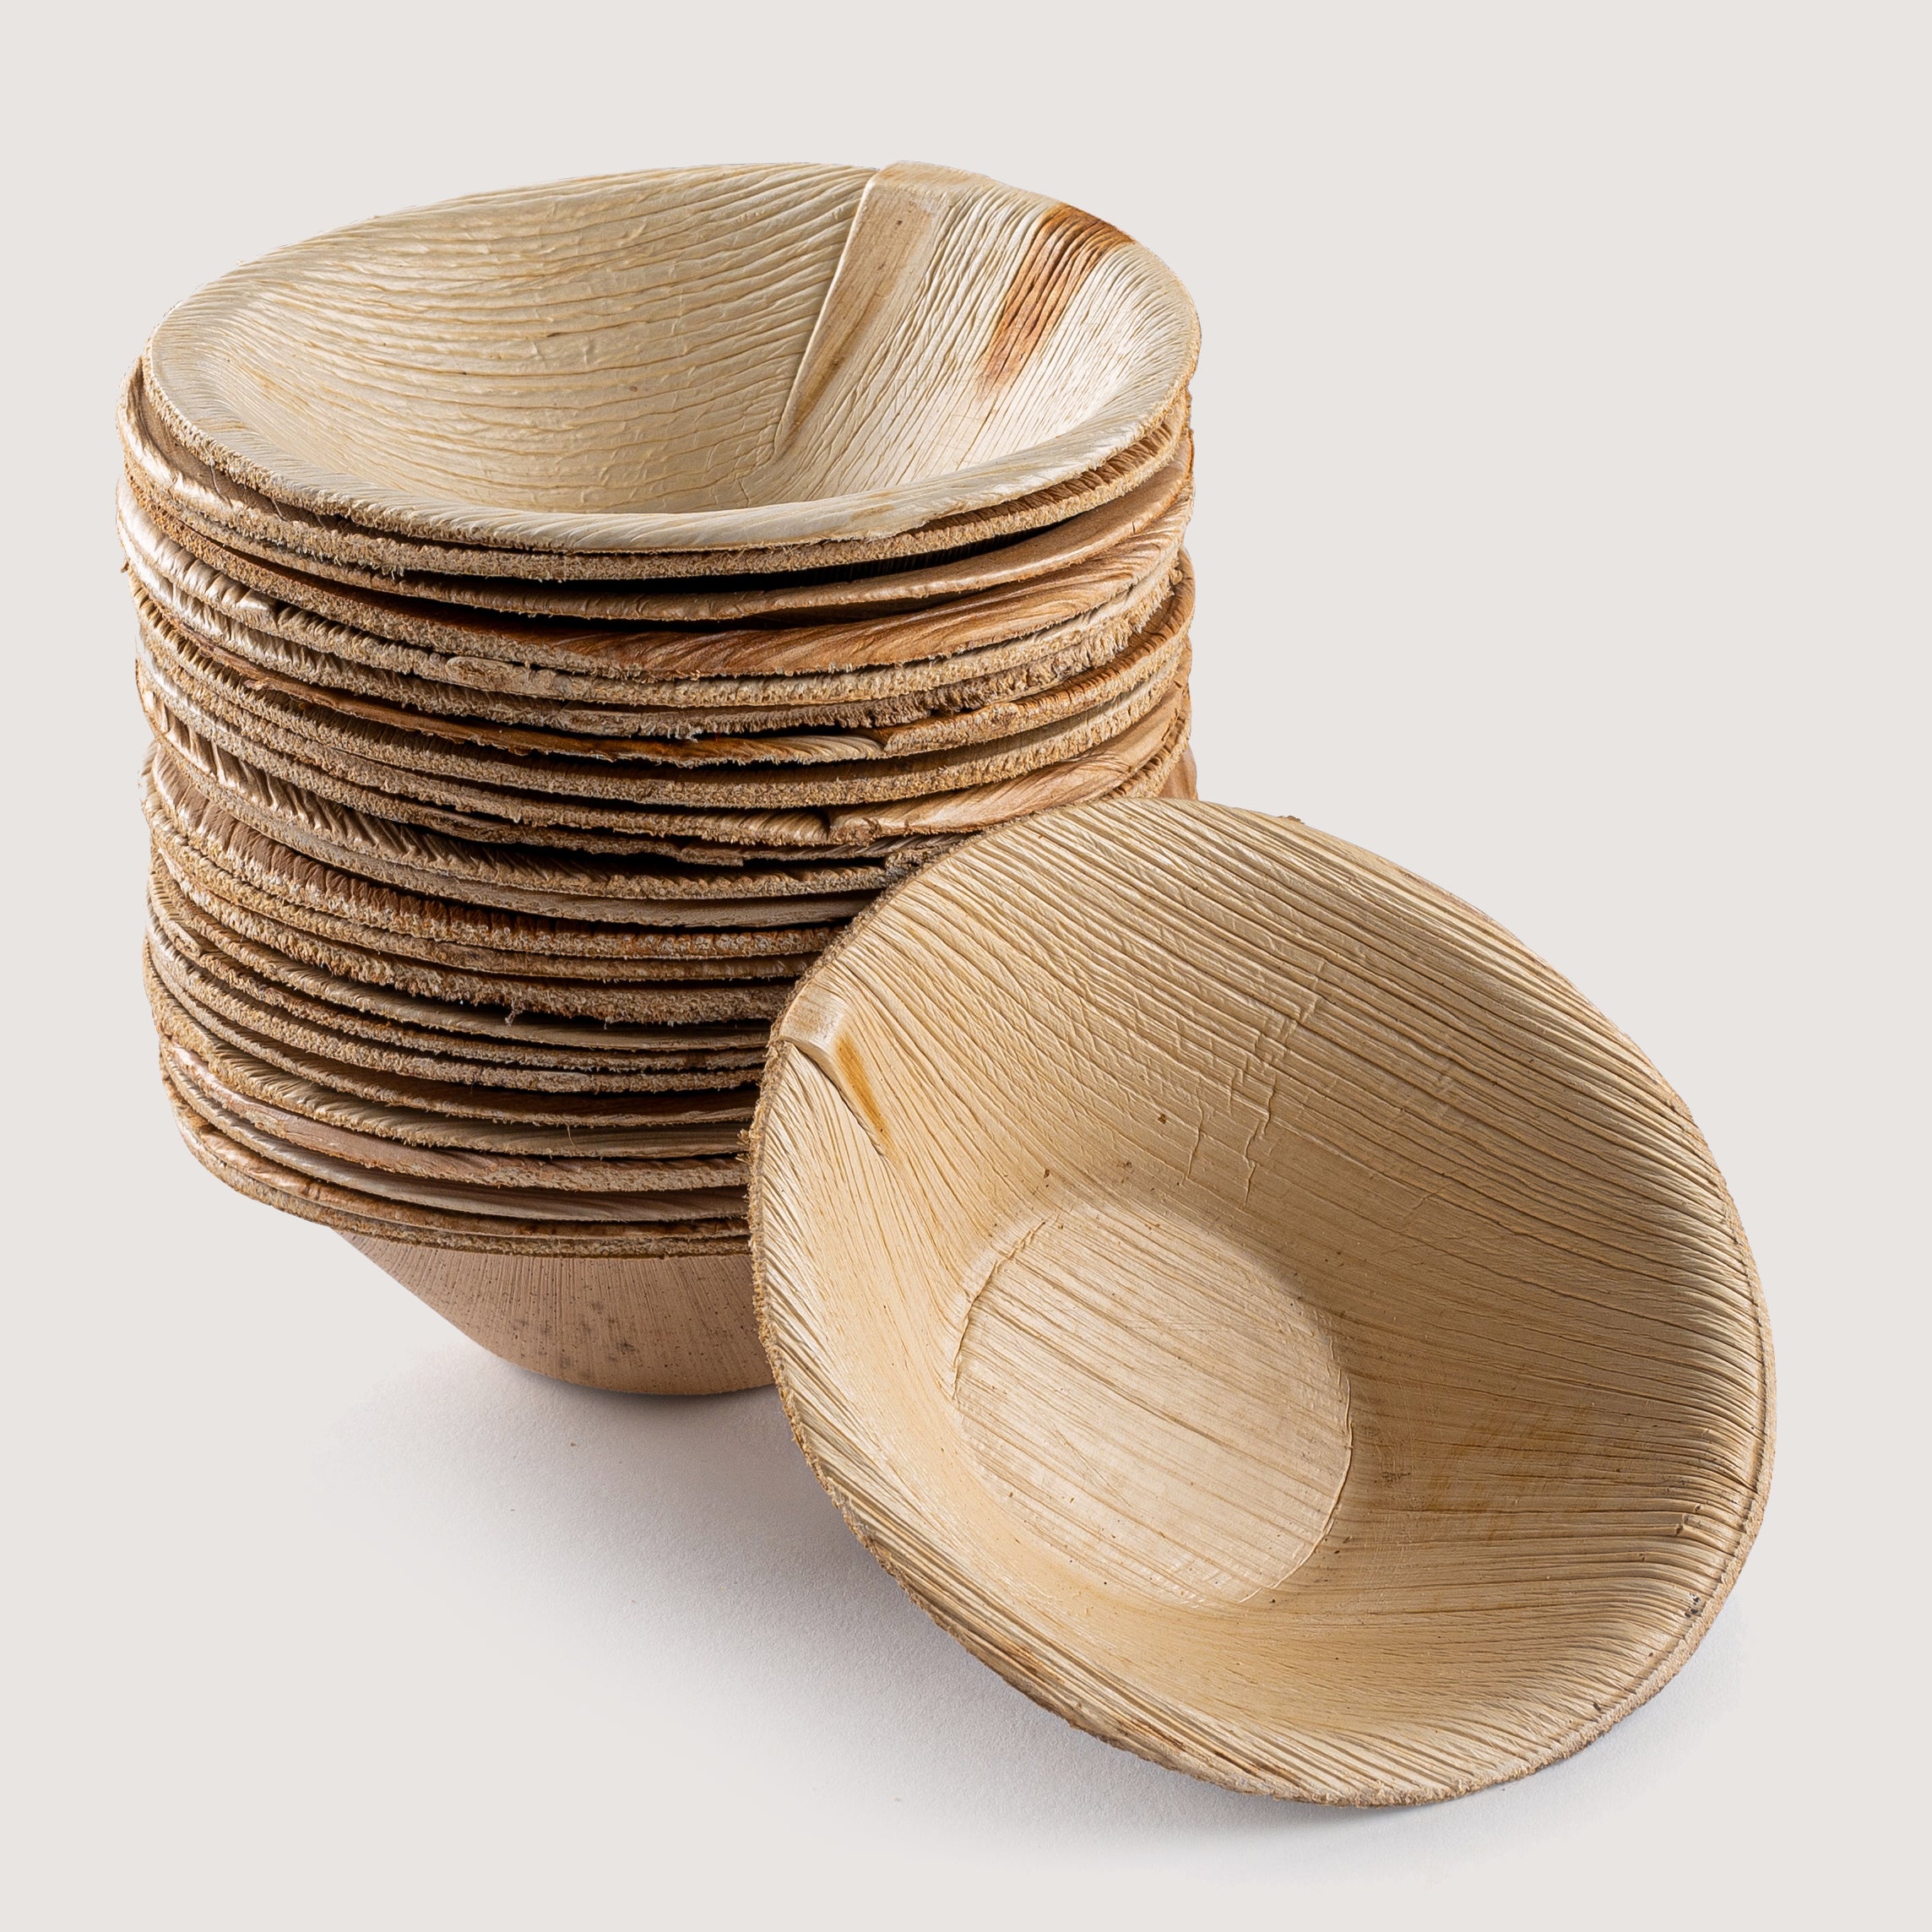 4" Round Dipping Bowls - Pack of 25